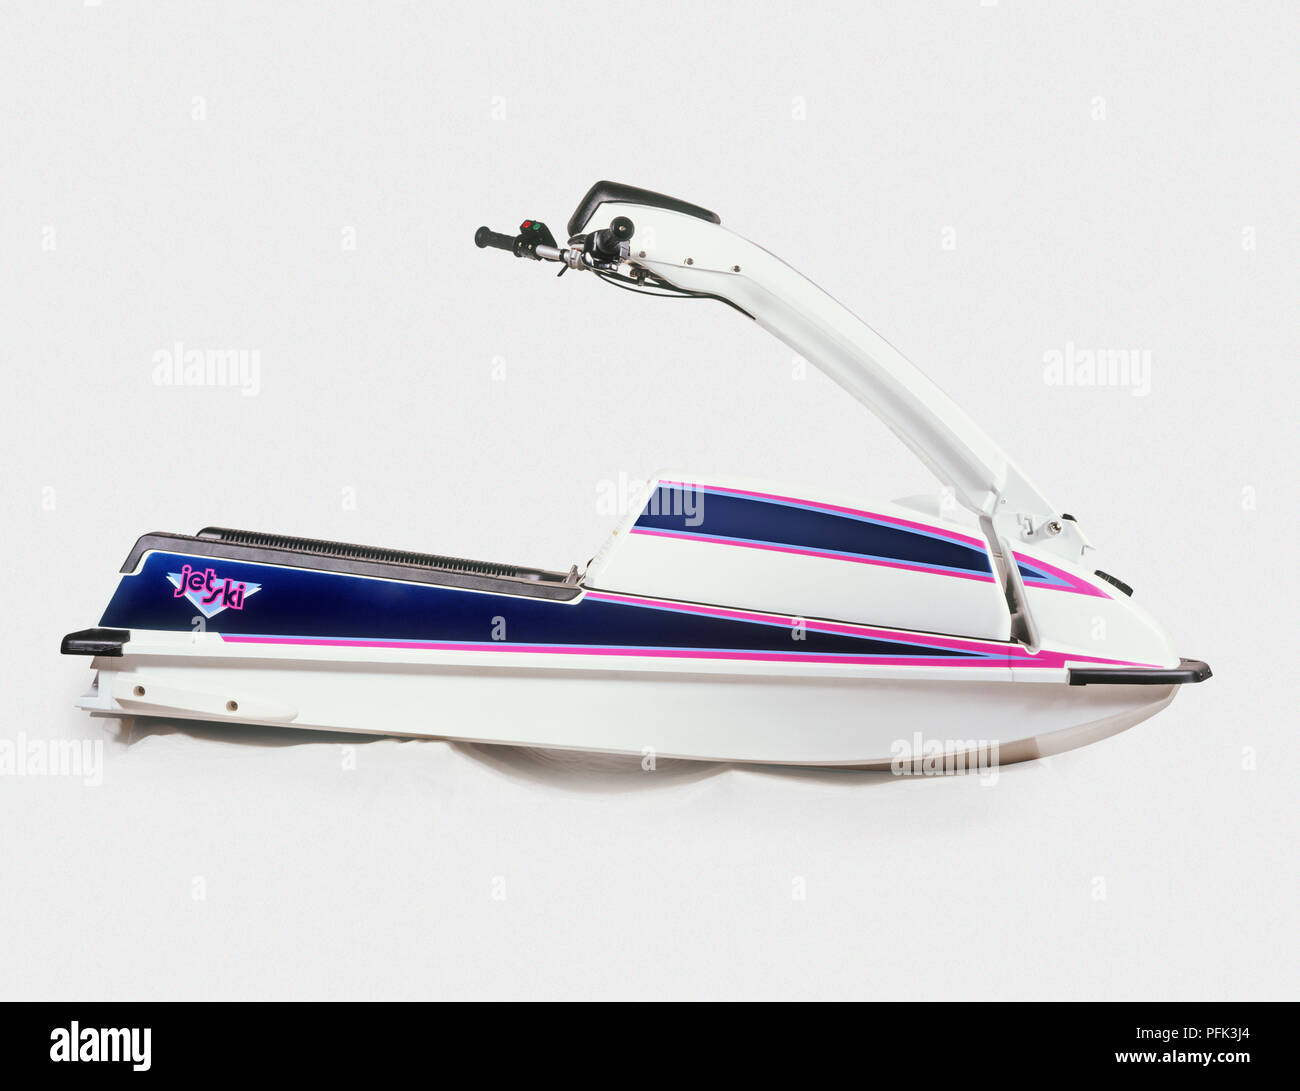 Jet boat, side view Stock Photo